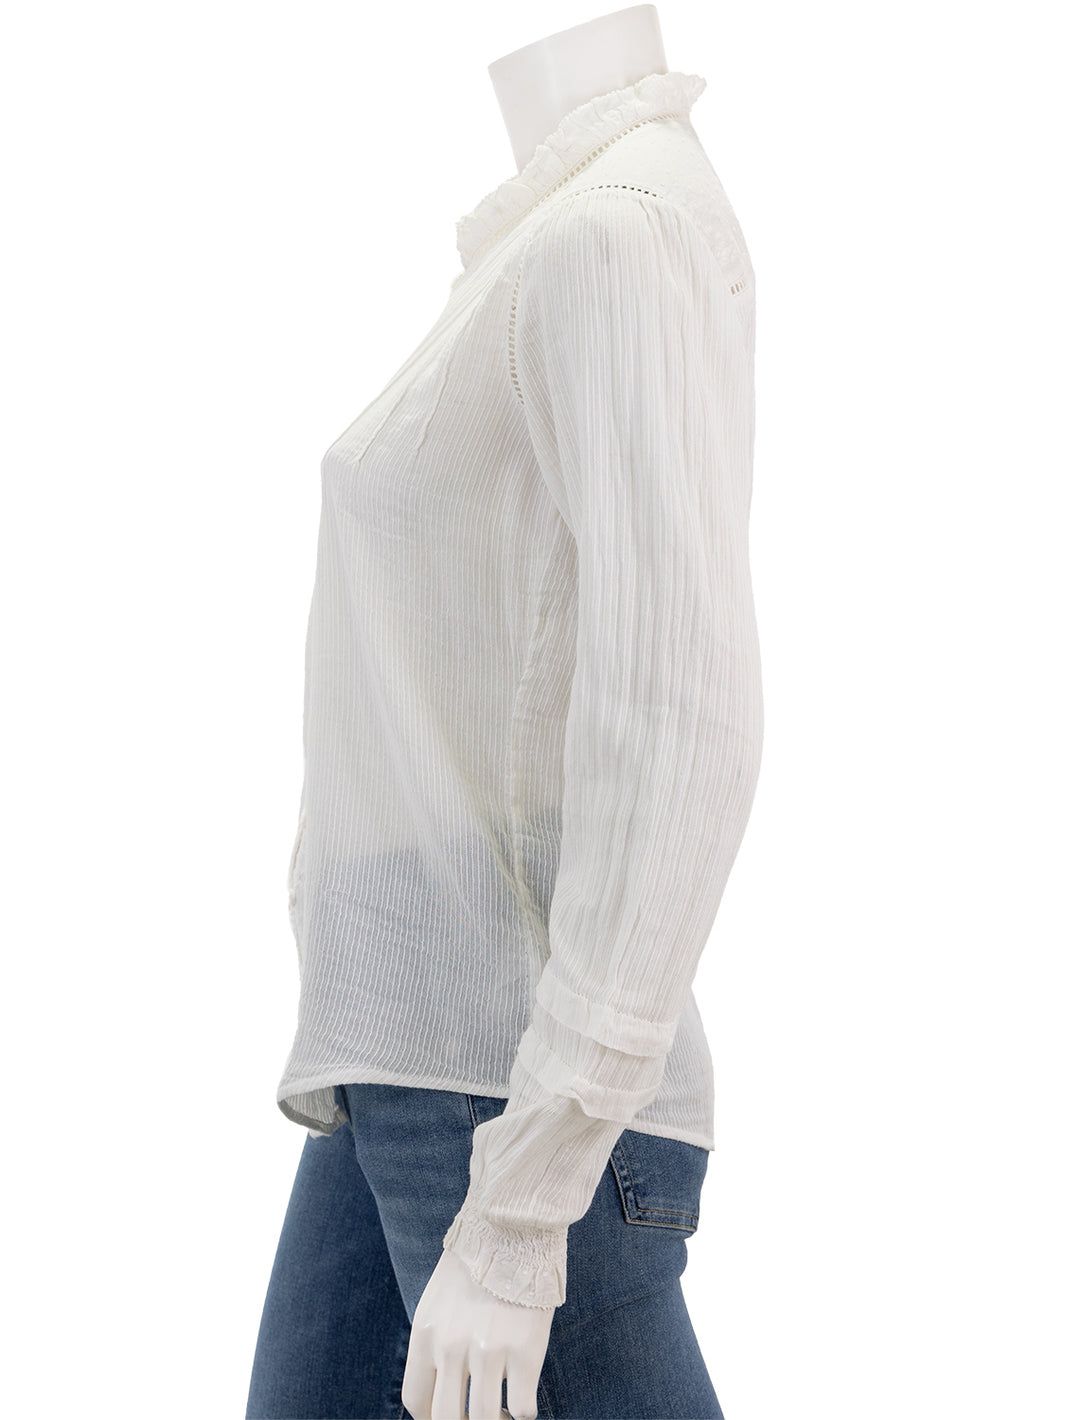 Side view of Faherty's willa top in white.